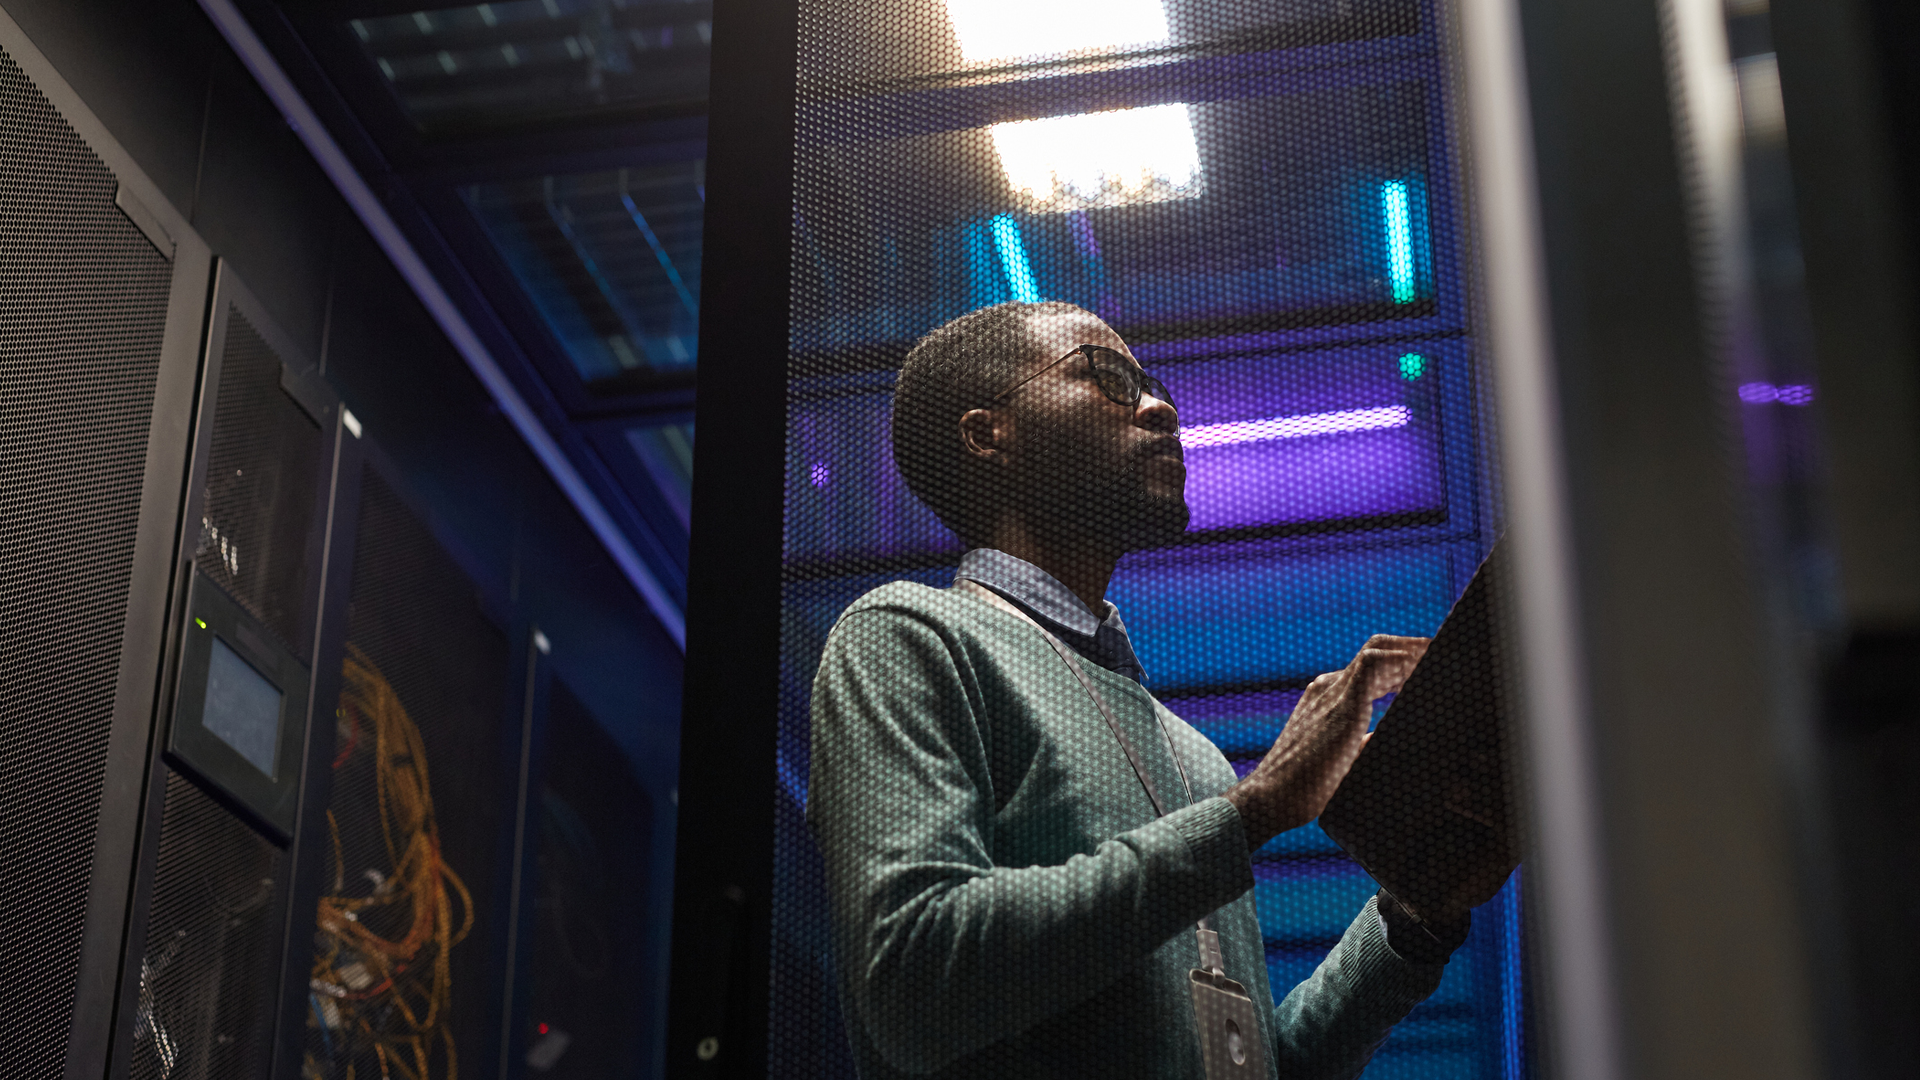 A person with a clipboard inspects a server room, illuminated by blue lights.